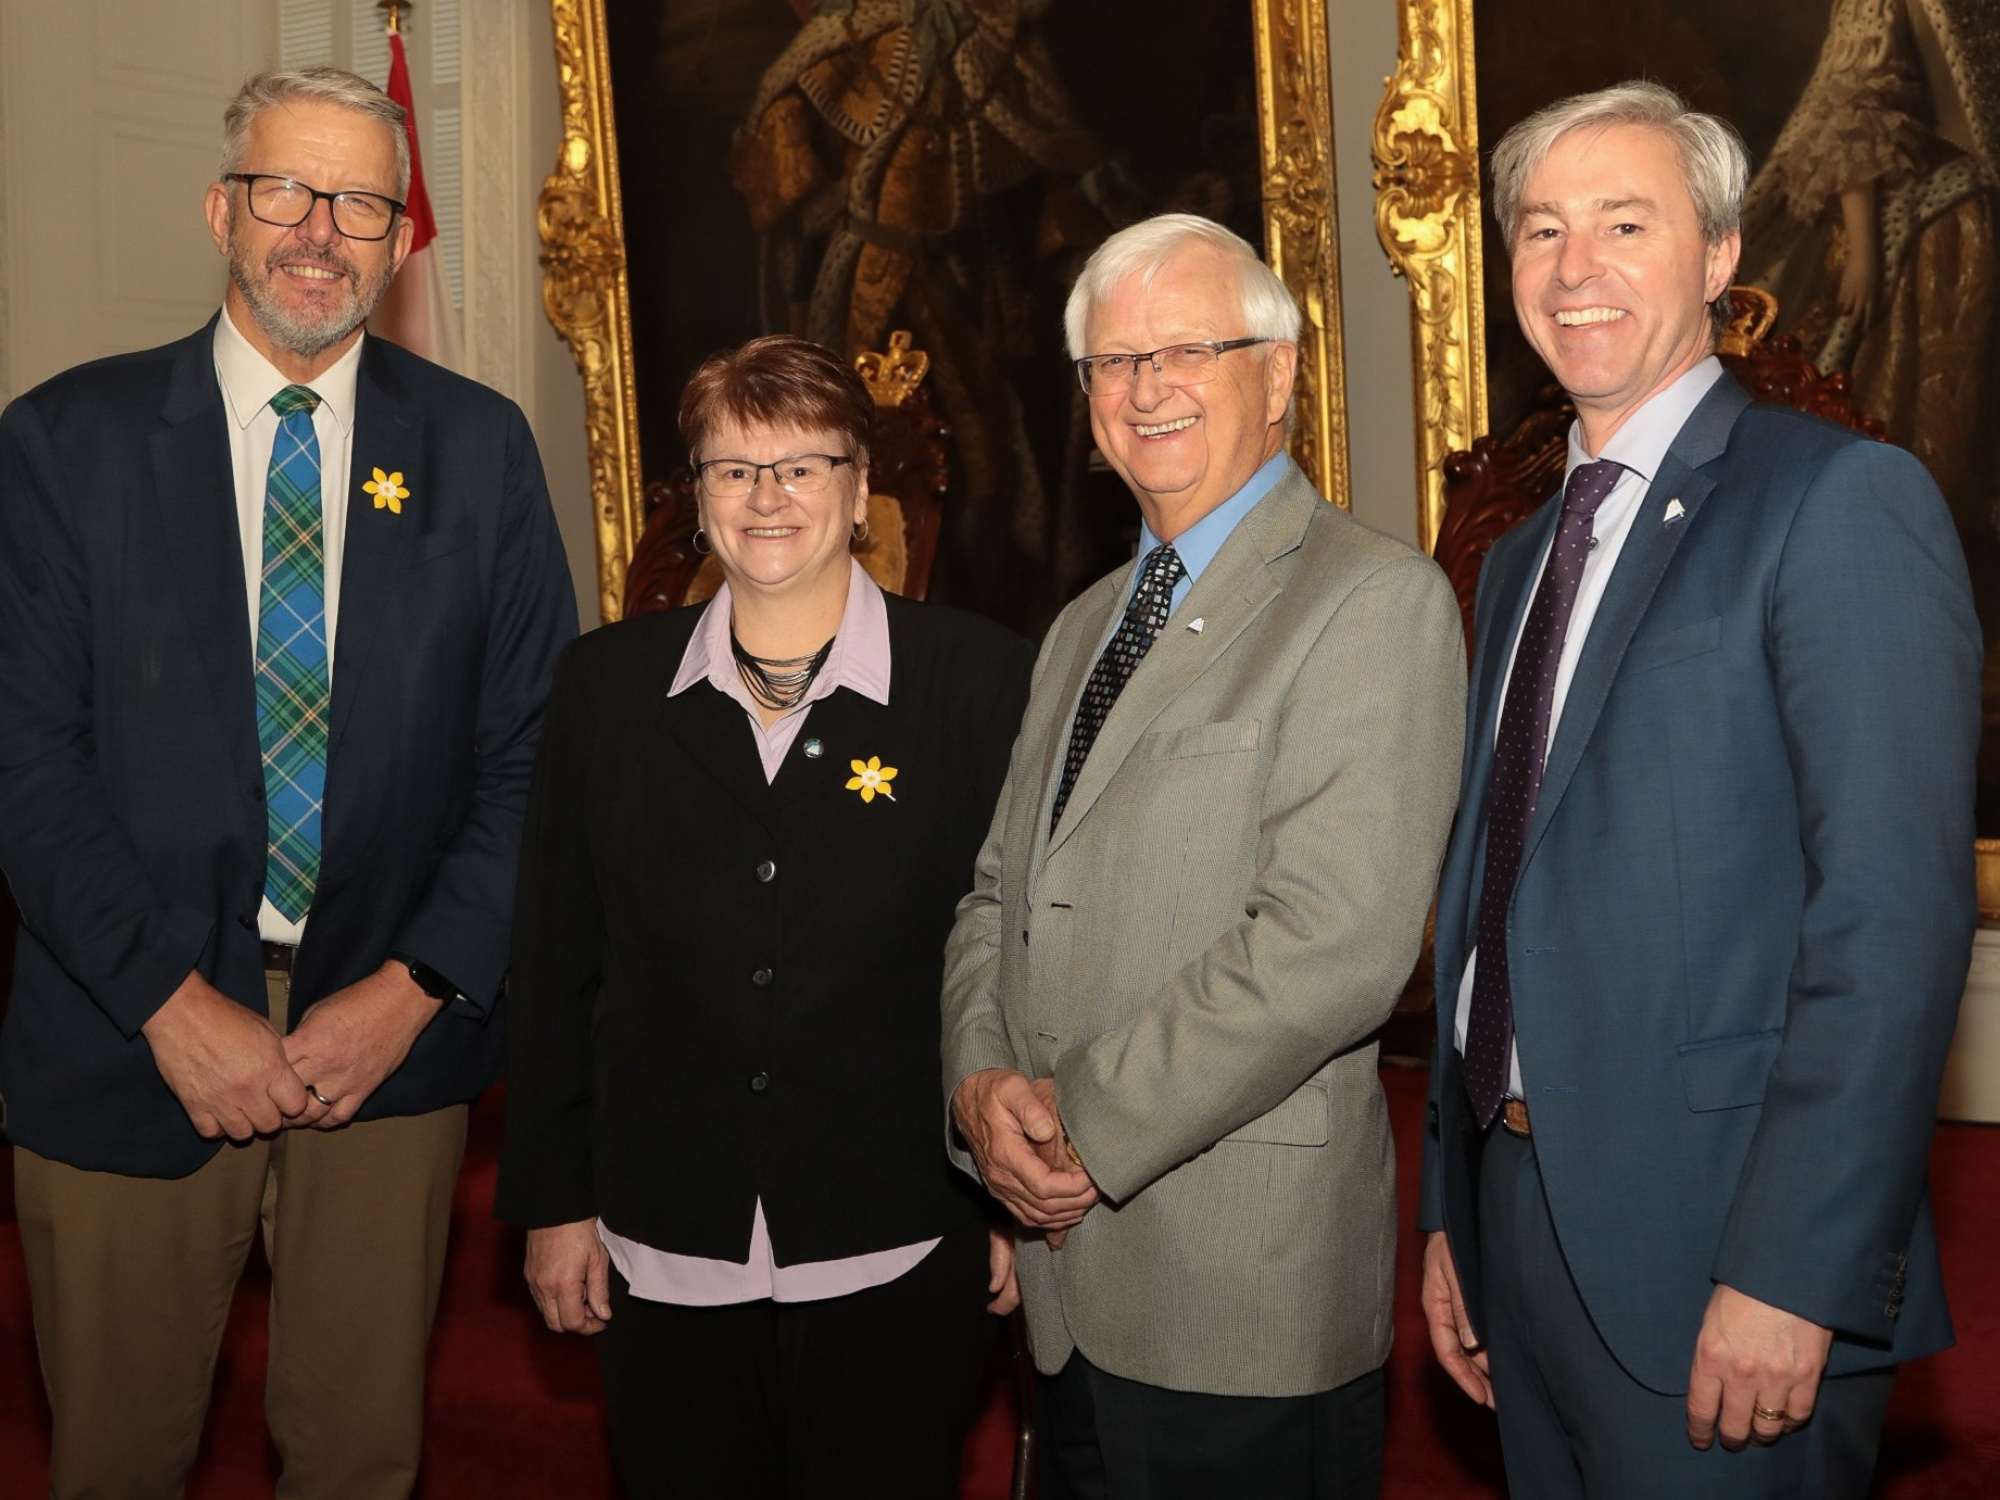 Photo of Municipal Affairs and Housing Minister John Lohr; Carolyn Boliver Getson, President of the Nova Scotia Federation of Municipalities (NSFM) and Mayor of the Municipality of the District of Lunenburg; Murray Scott, co-chair of the Service Exchange Renegotiation and Municipal Government Act Review Committee and Mayor of the Municipality of Cumberland; and Premier Tim Houston